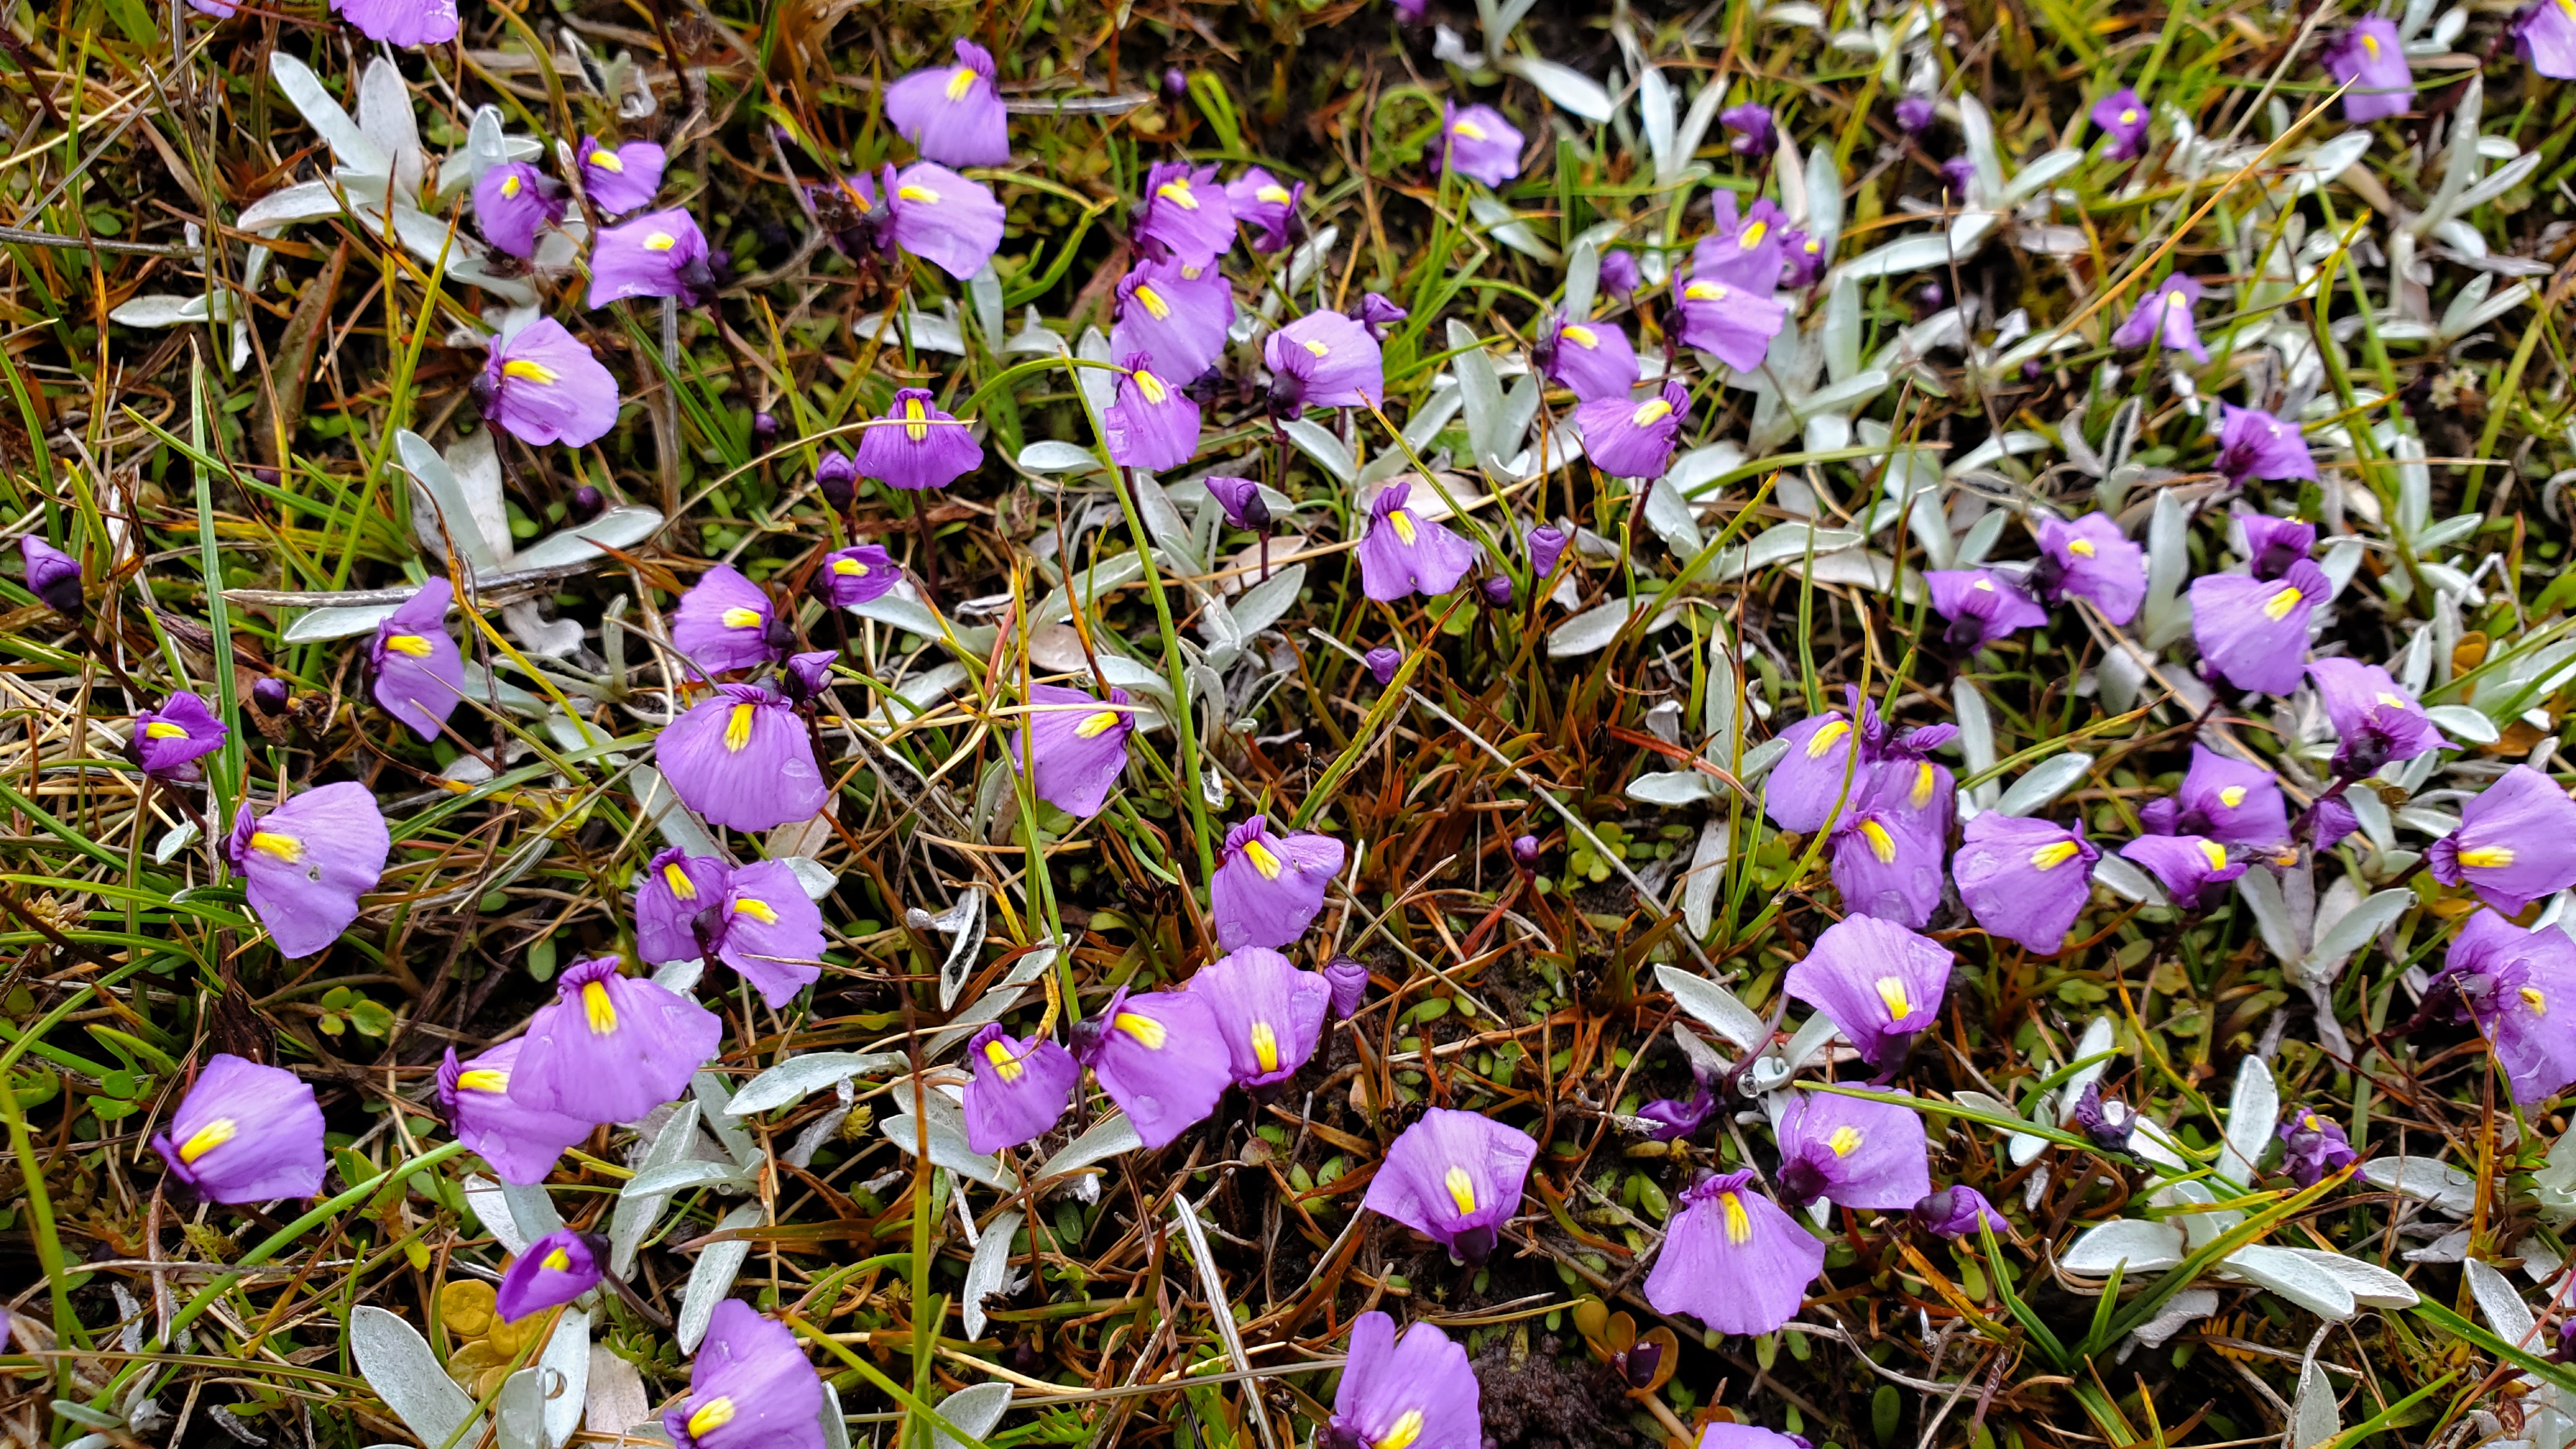 Utricularia dichotoma, commonly known as Fairy Aprons